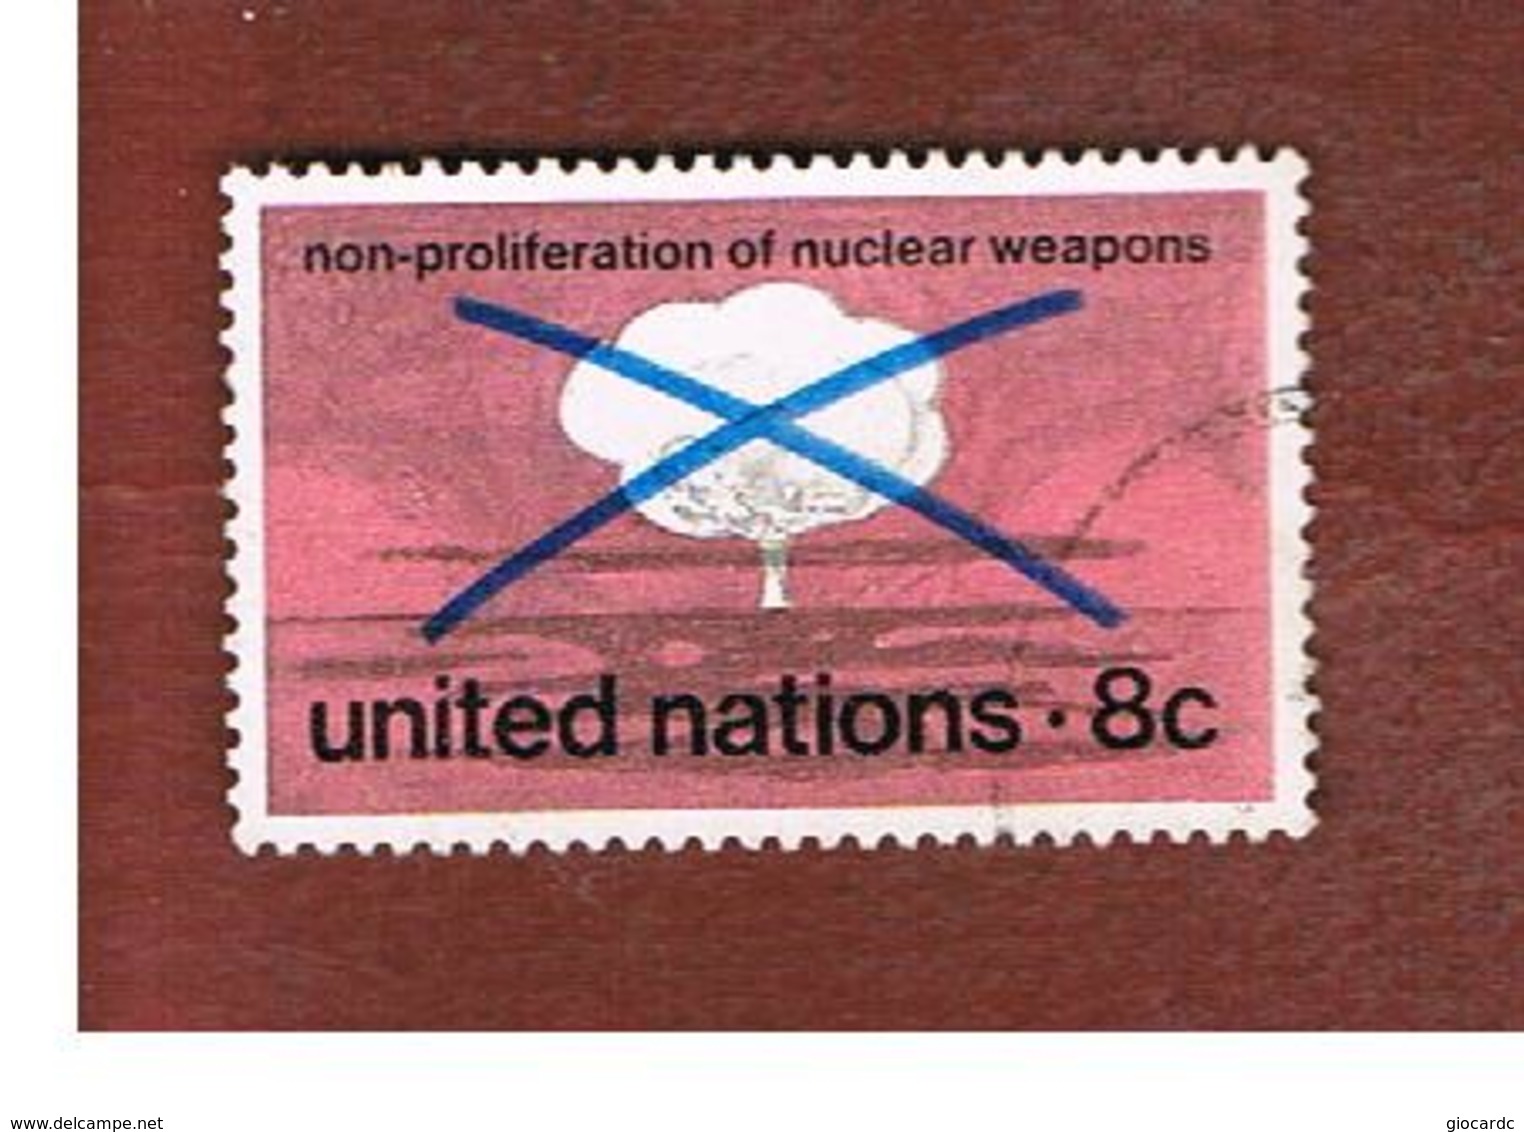 ONU (UNITED NATIONS) NEW YORK   - SG NY227   -  1972 NON-PROLIFERATION OF NUCLEAR   WEAPONS    - USED - Gebruikt